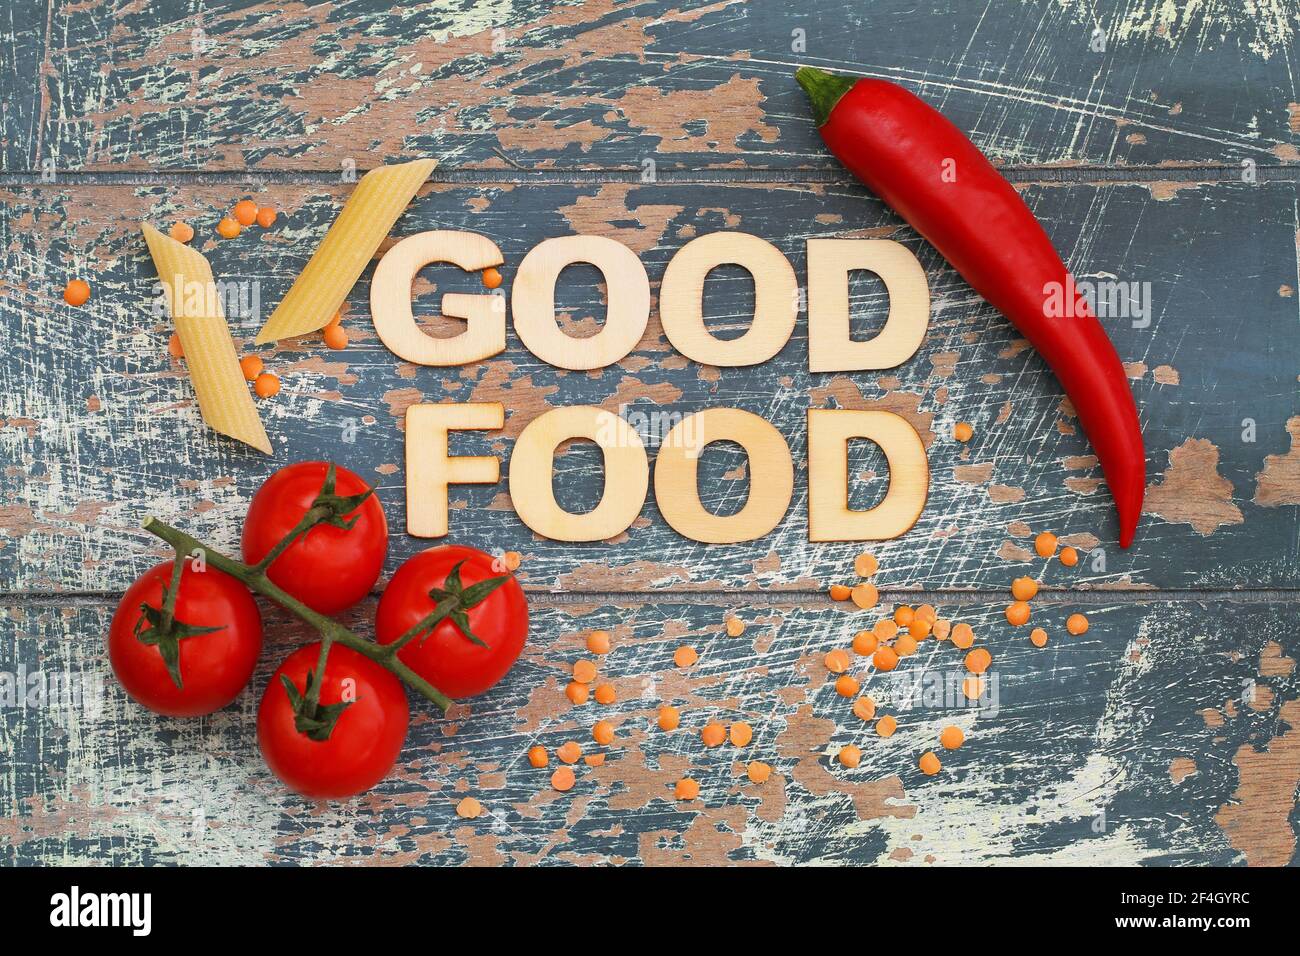 Good food written with wooden letters on rustic wood with cherry tomatoes, pasta, lentils and chili Stock Photo